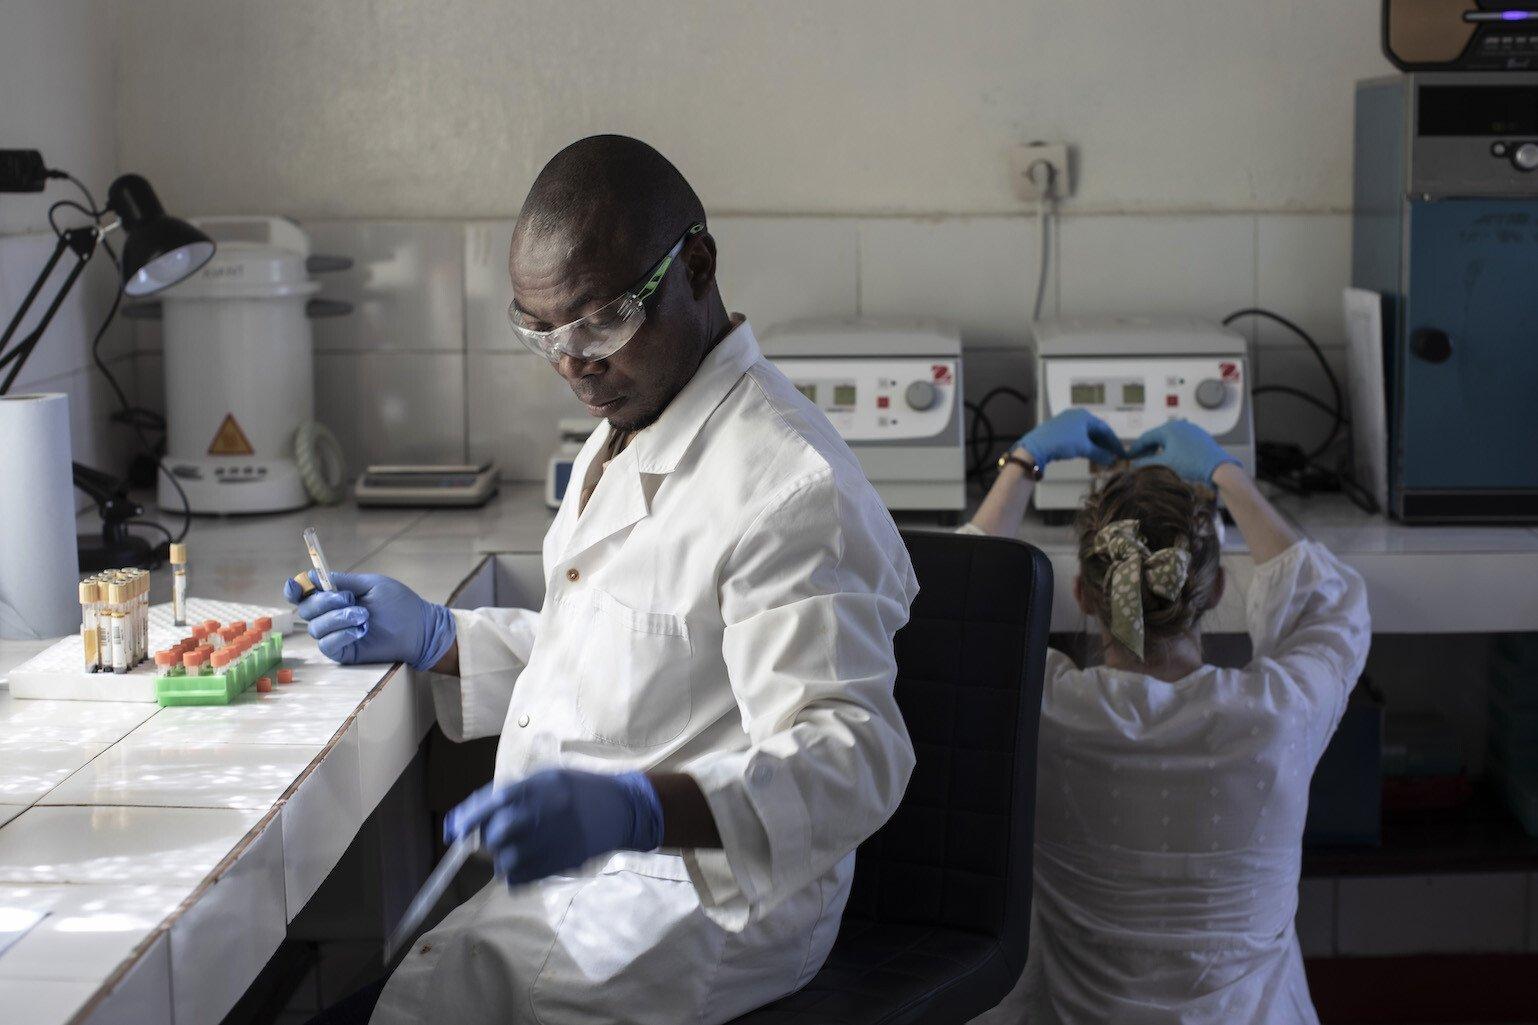 A healthcare worker analyses samples in a hospital laboratory.